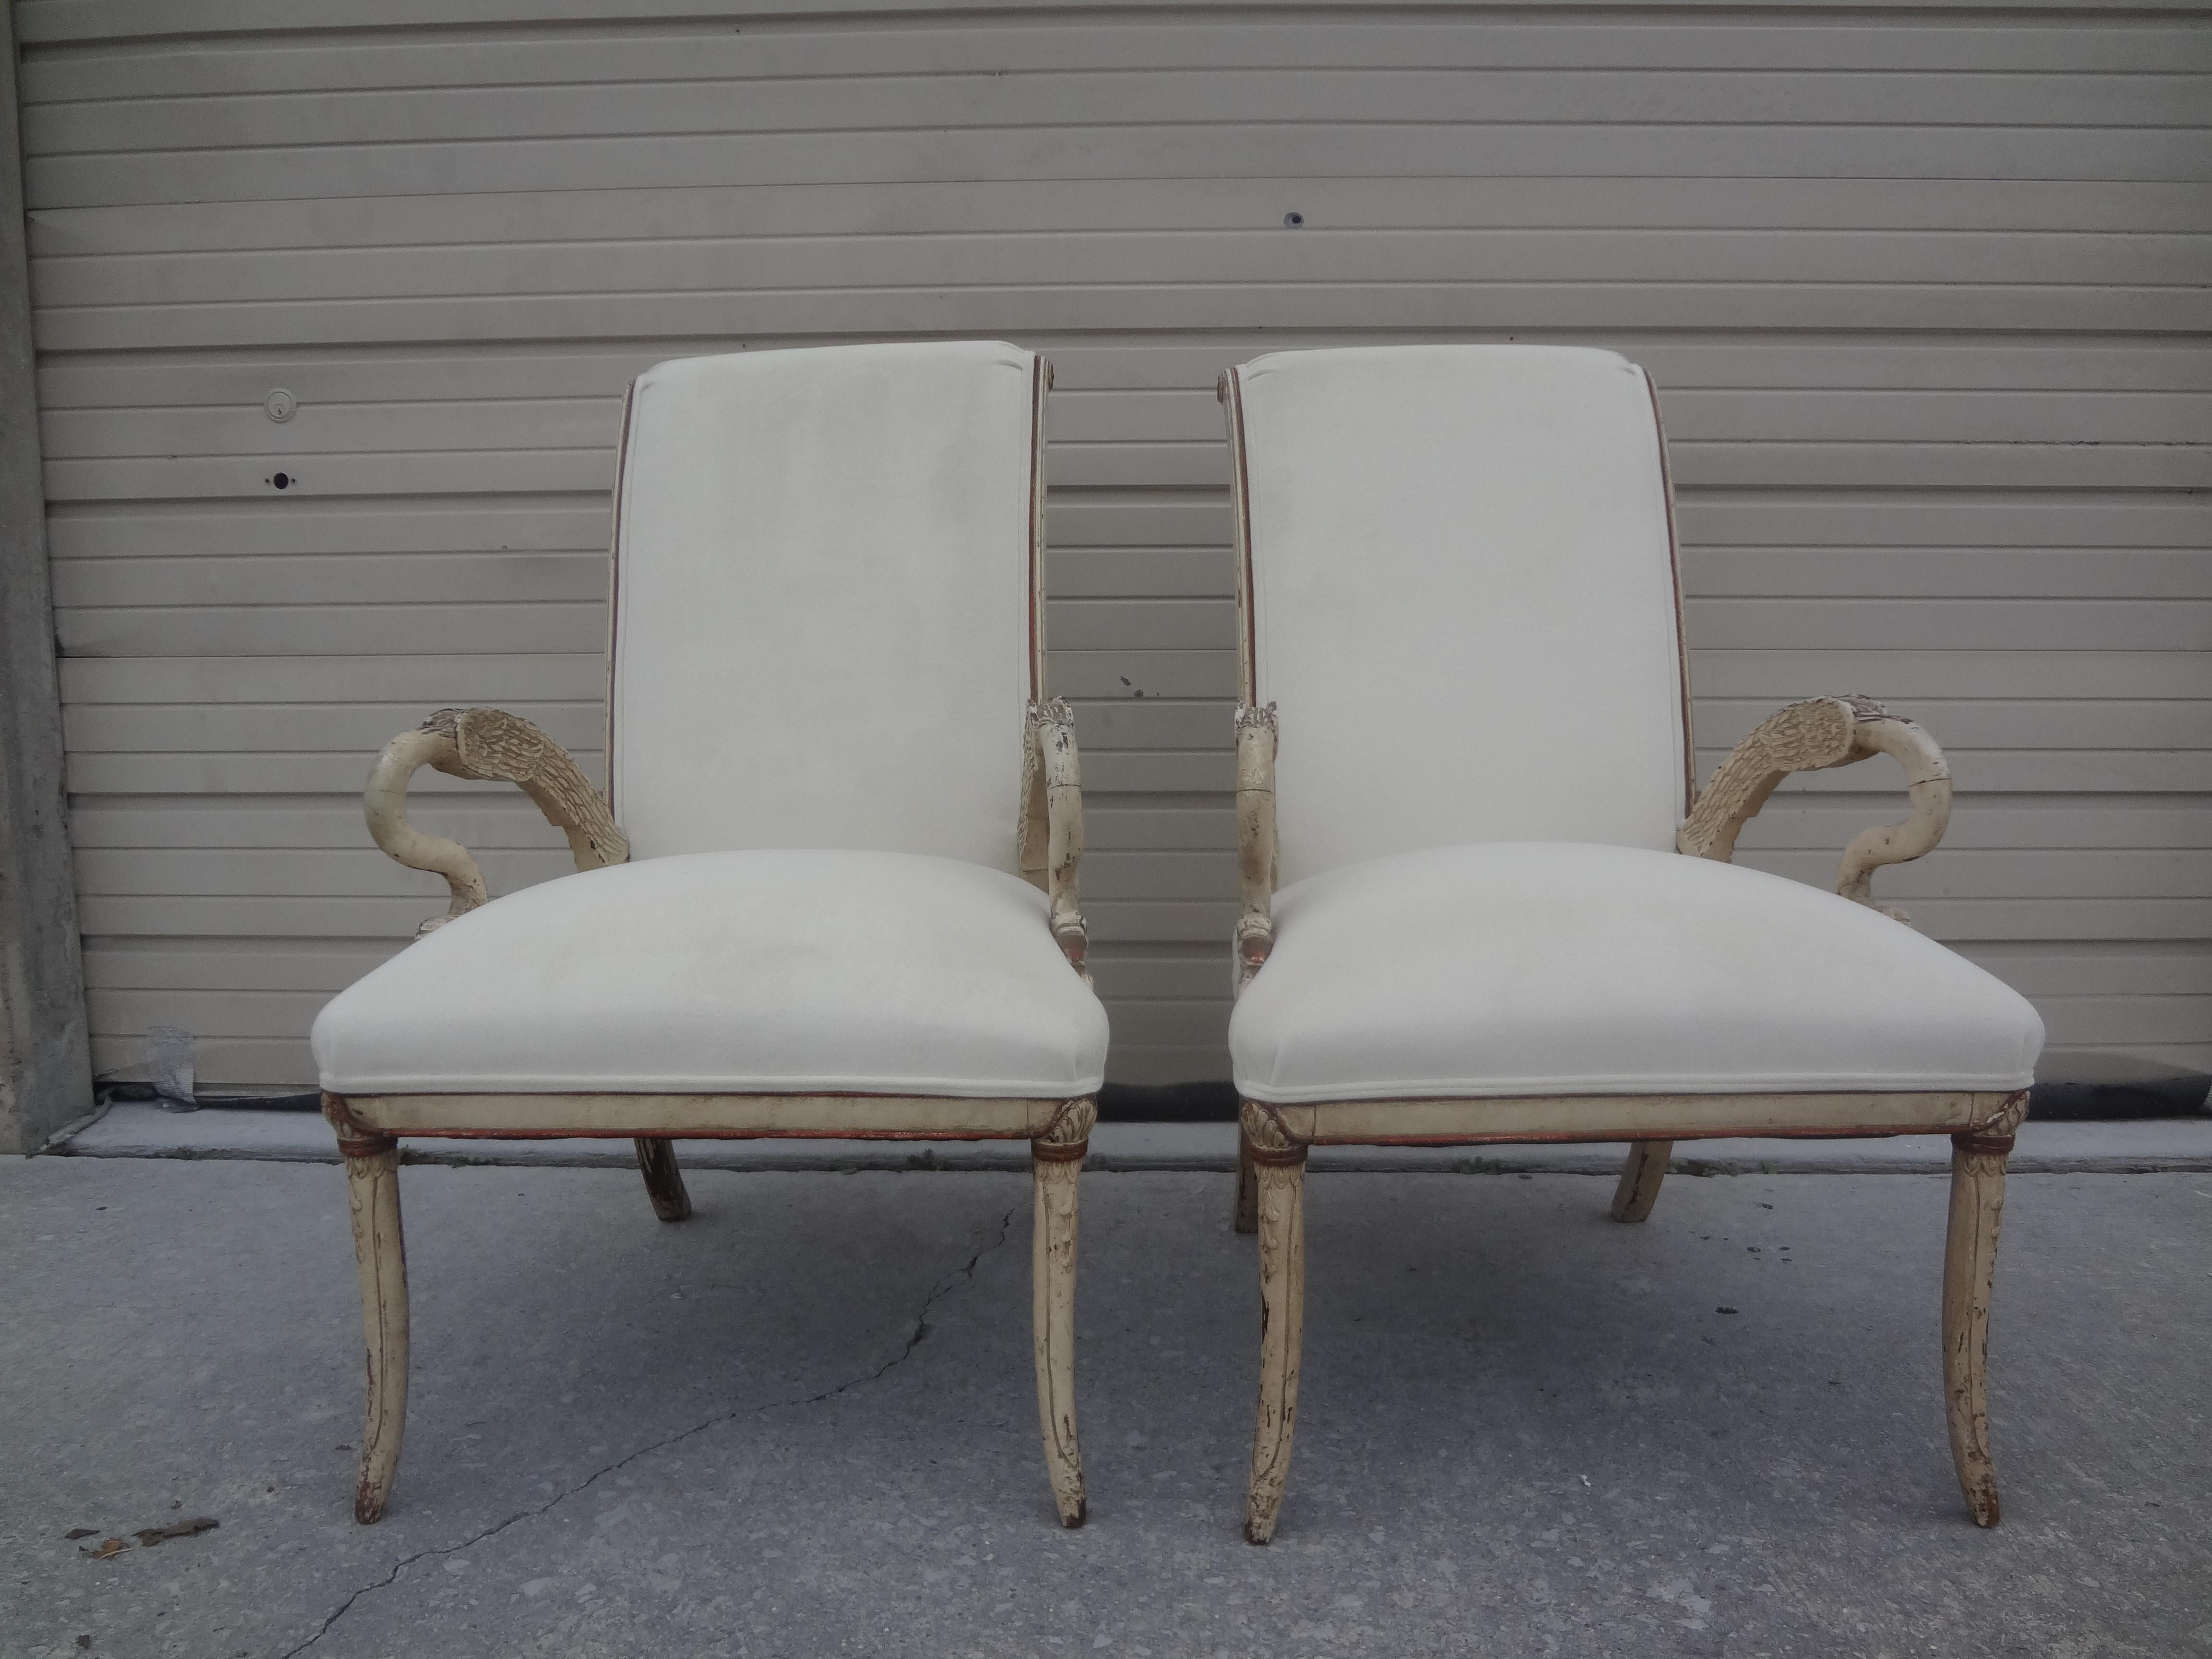 Pair of Italian neoclassical style swan chairs.
This lovely pair of Italian neoclassical style, Empire style or Gustavian Style armchairs have beautifully carved swan arms and are professionally upholstered in cream colored velvet. Versatile